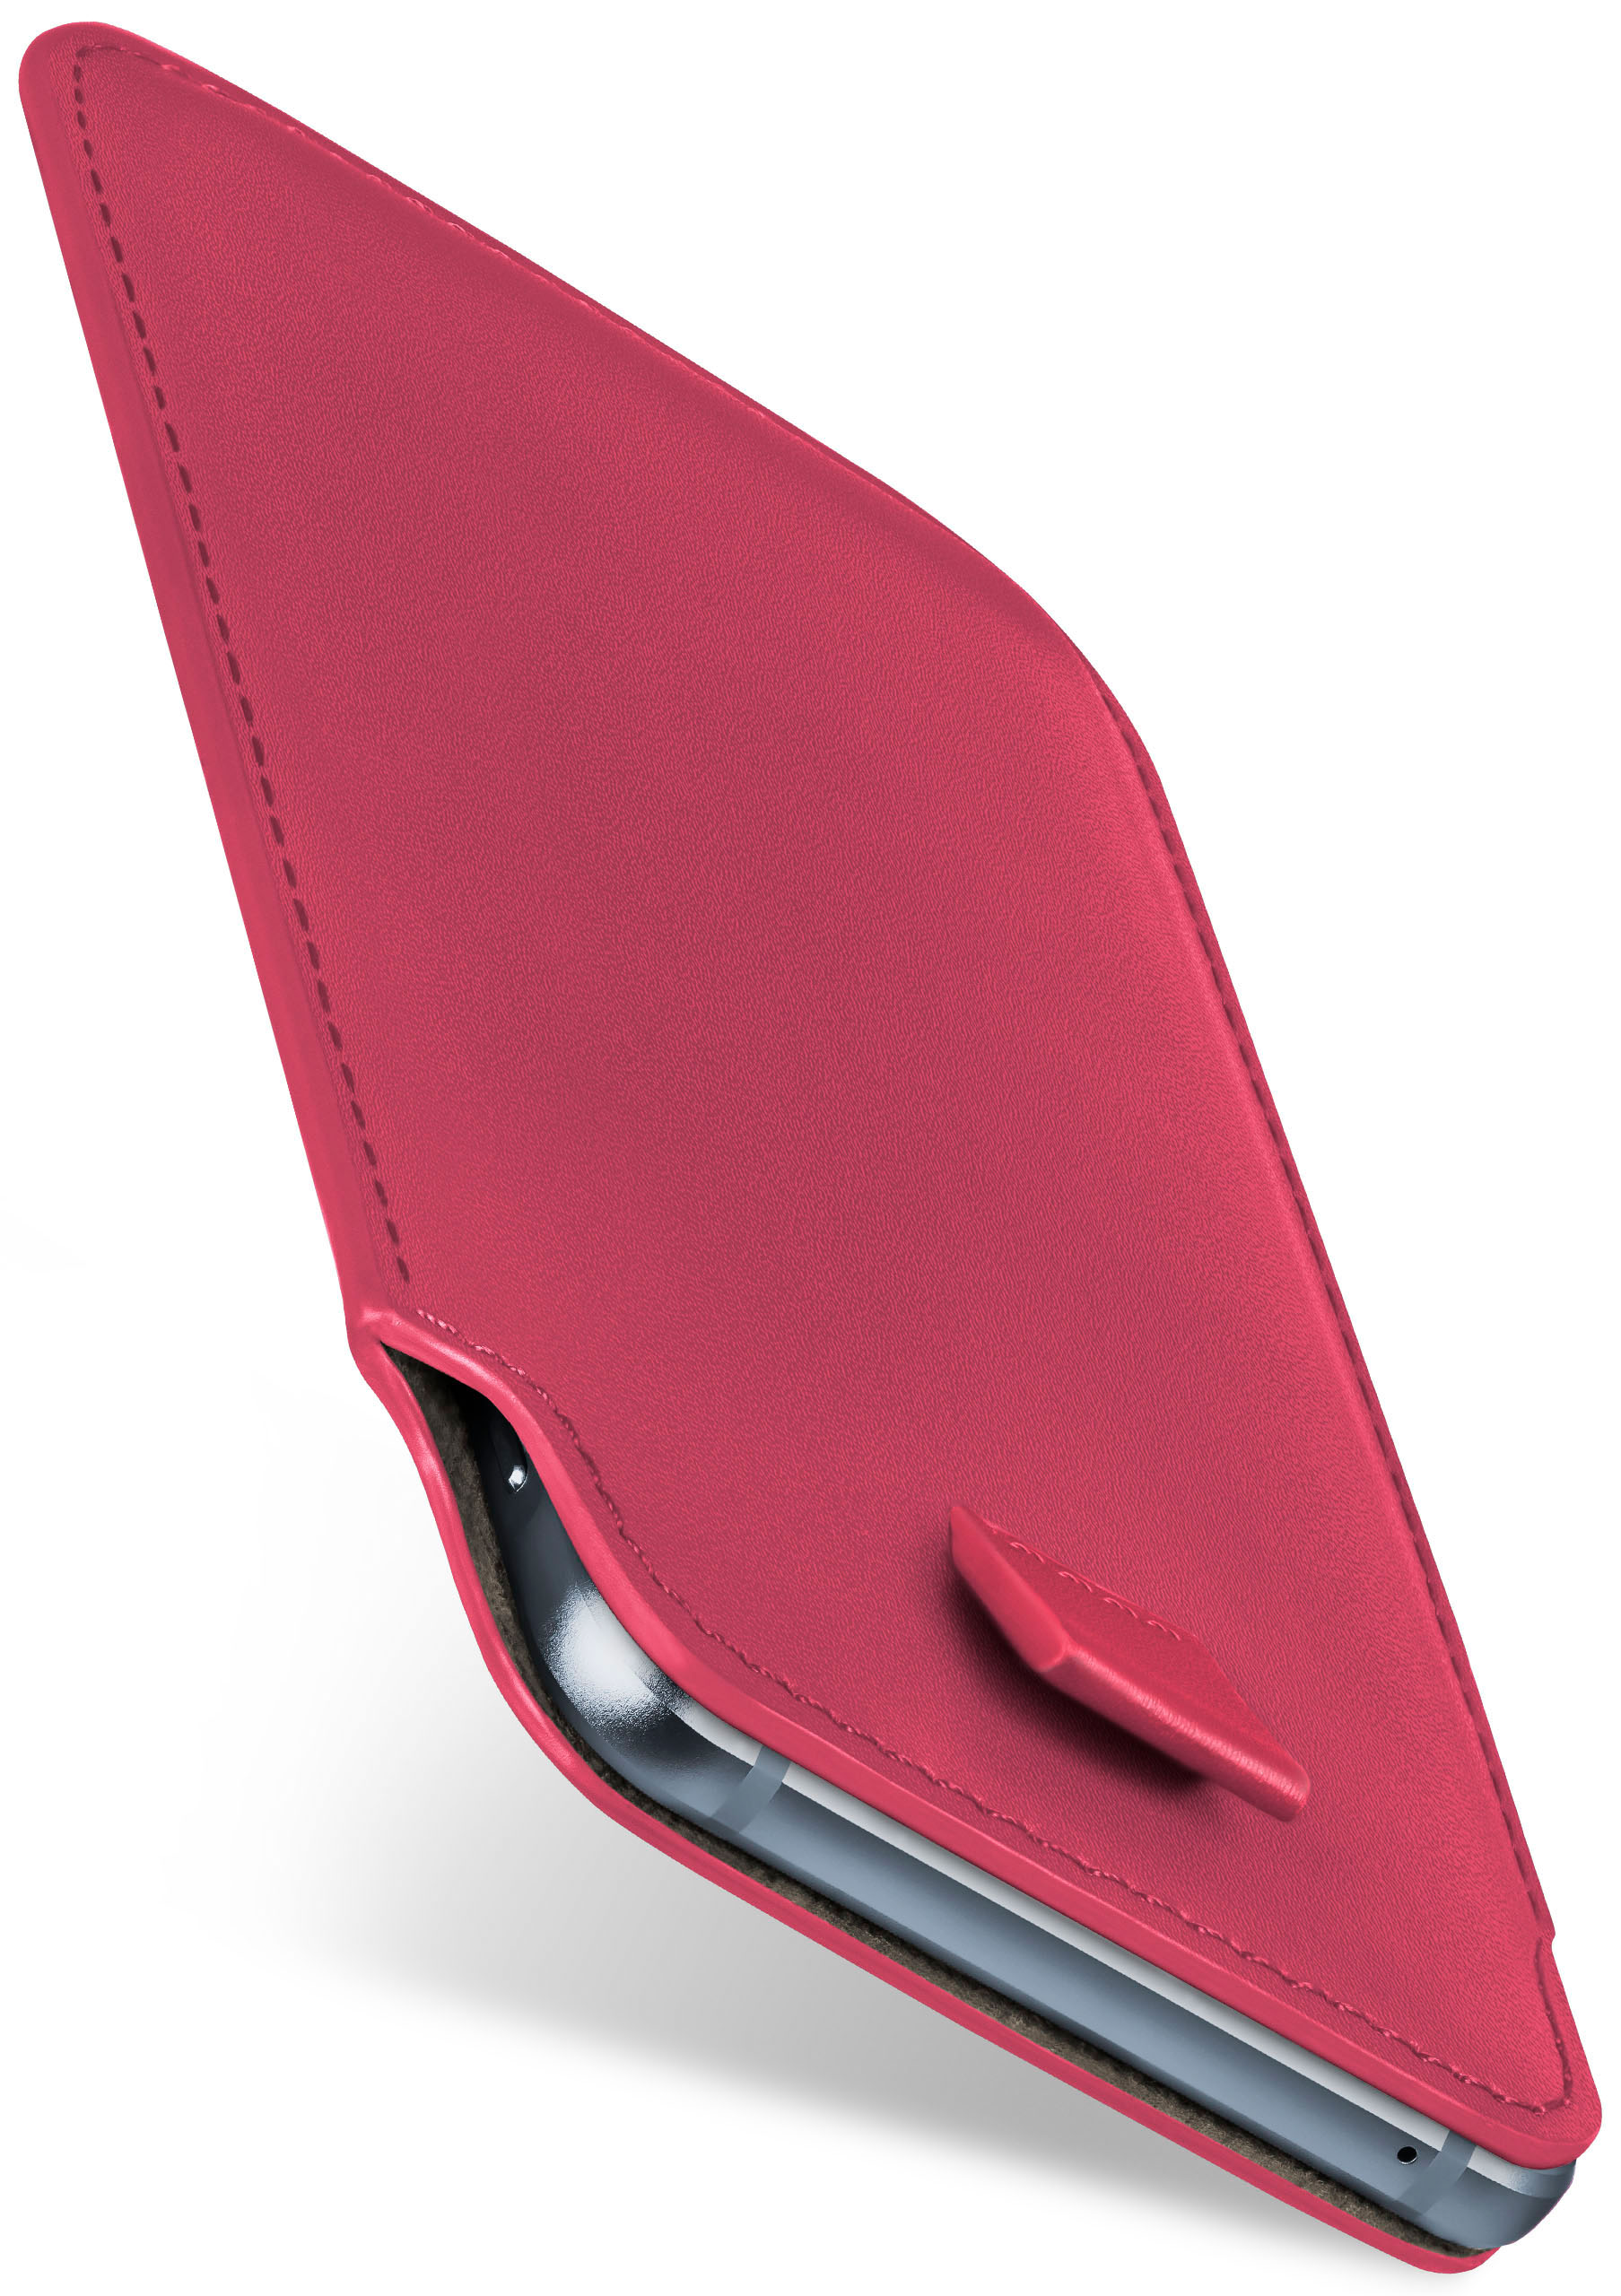 Galaxy Slide active, S7 Cover, MOEX Berry-Fuchsia Samsung, Full Case,